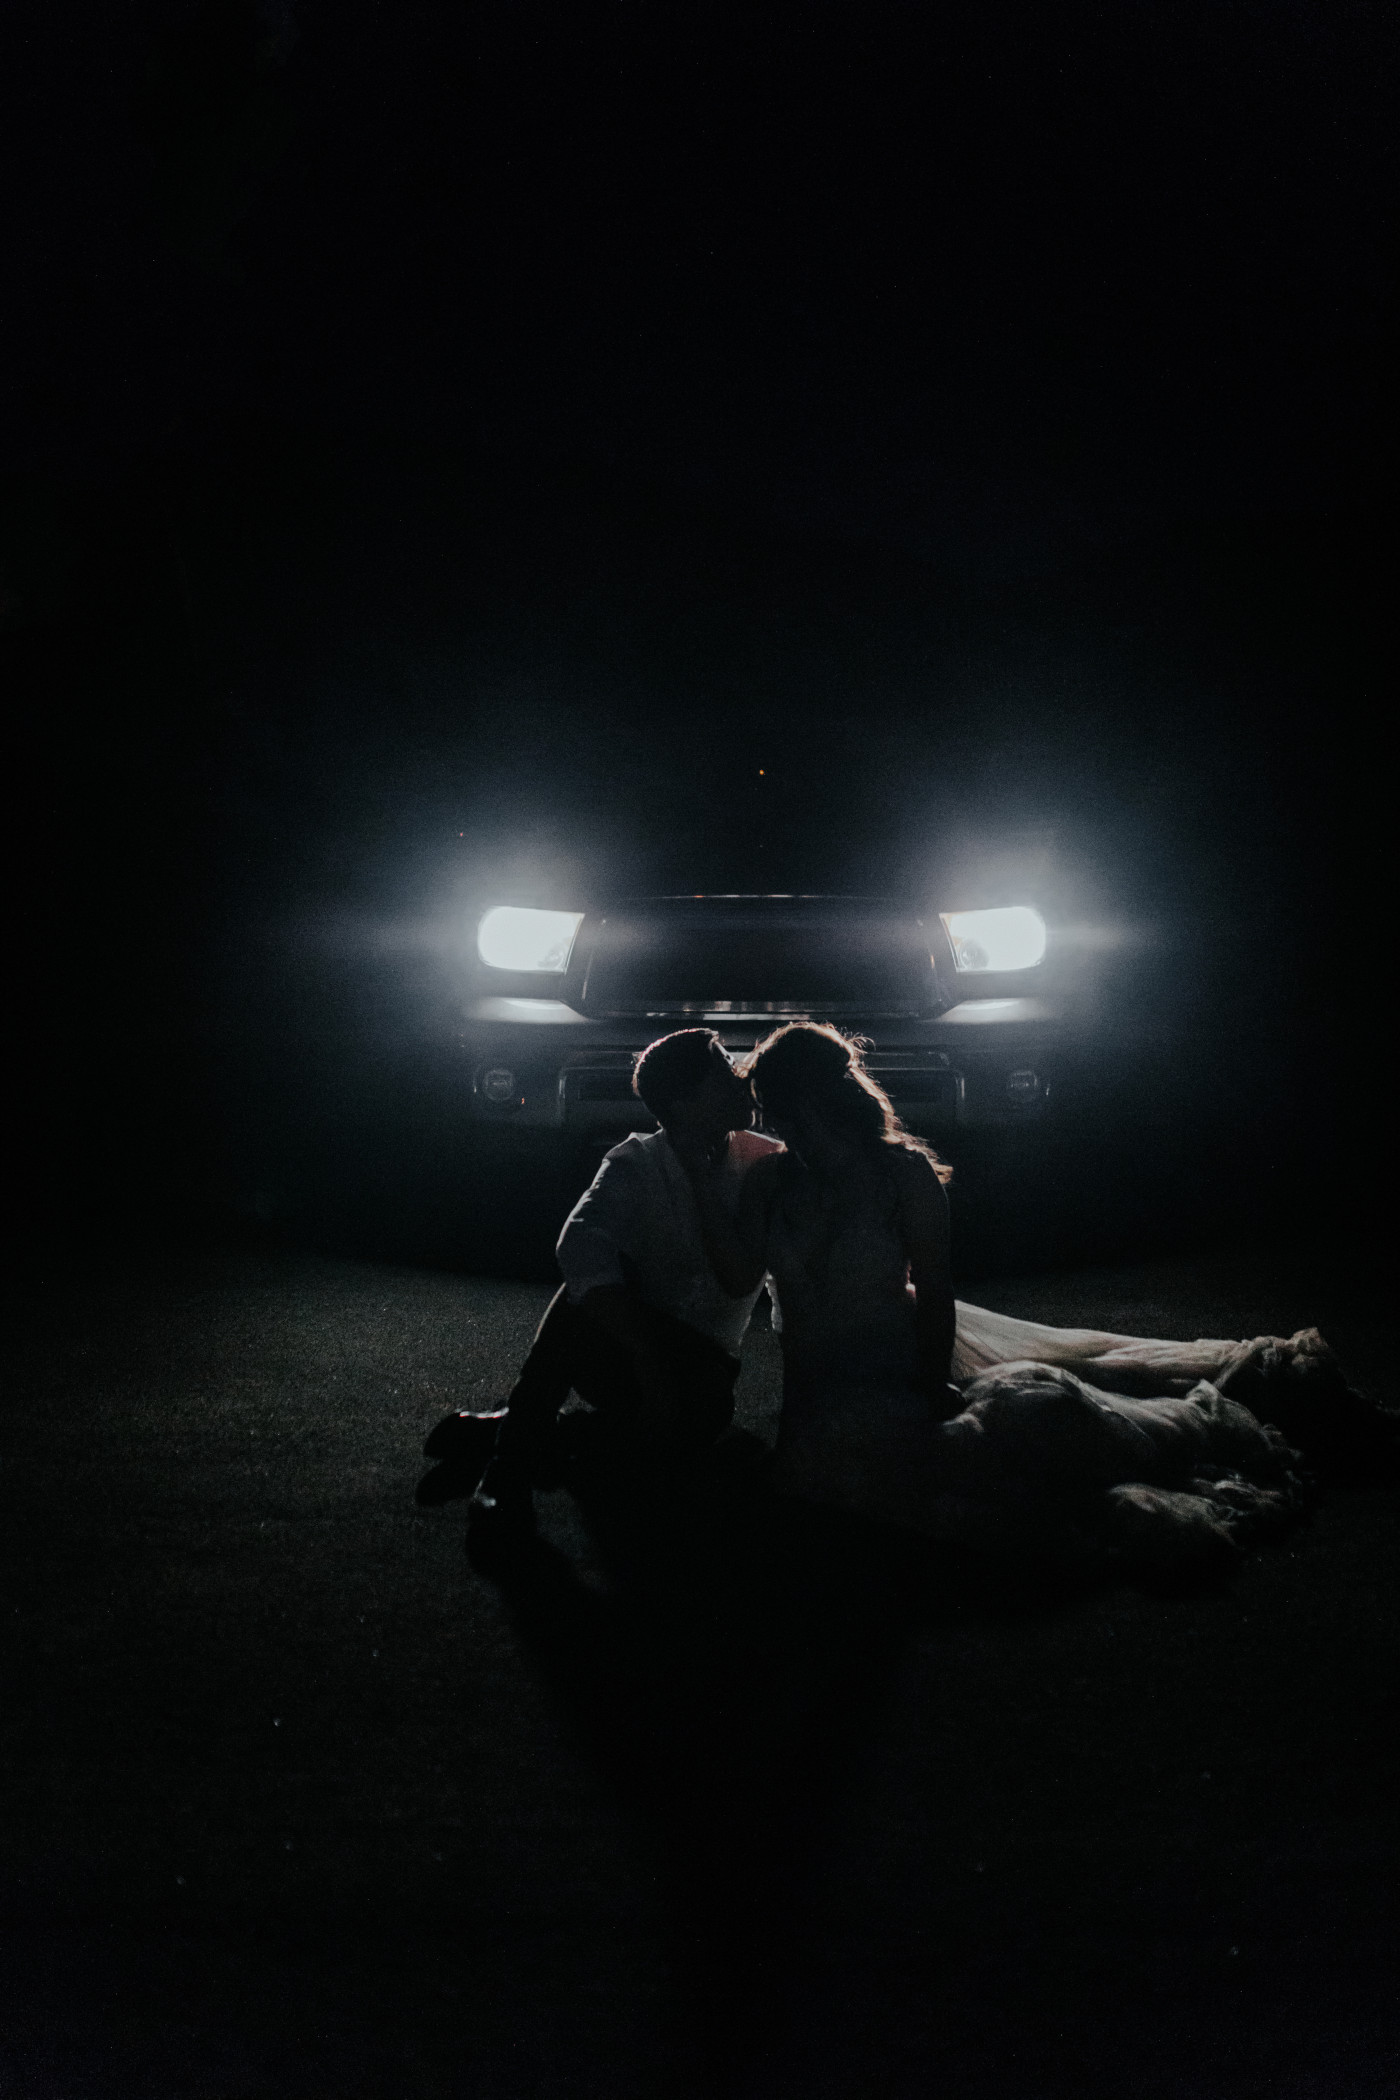 Zack and Shelby kiss in the dark while sitting in front of headlights in Joshua Tree.